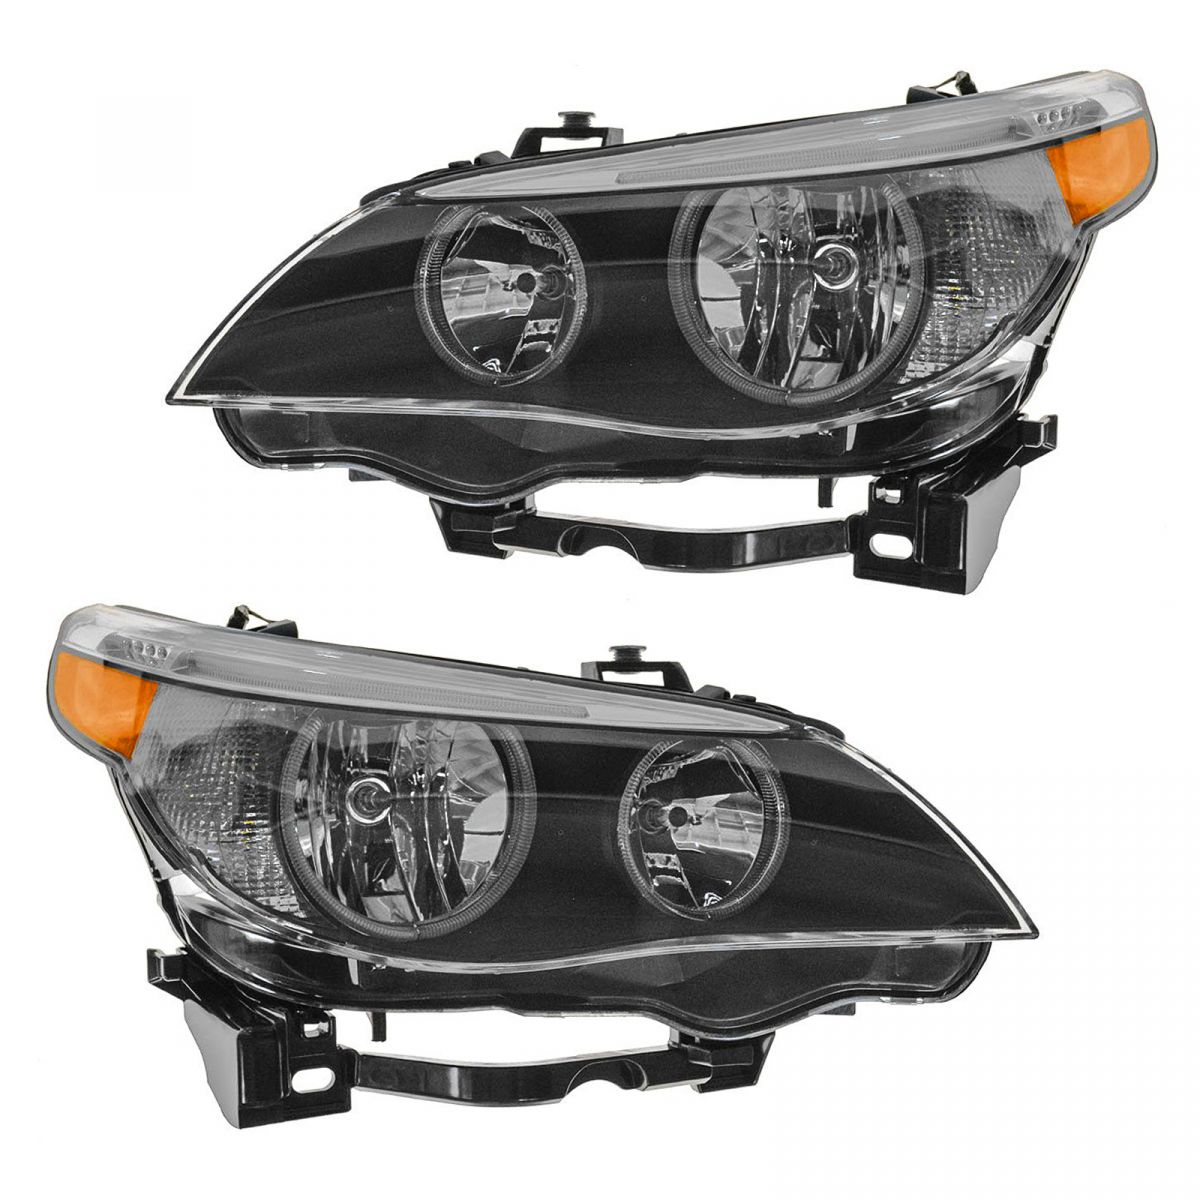 Headlights Headlamps Halogen Left & Right Pair Set for BMW E60 5 Series NEW